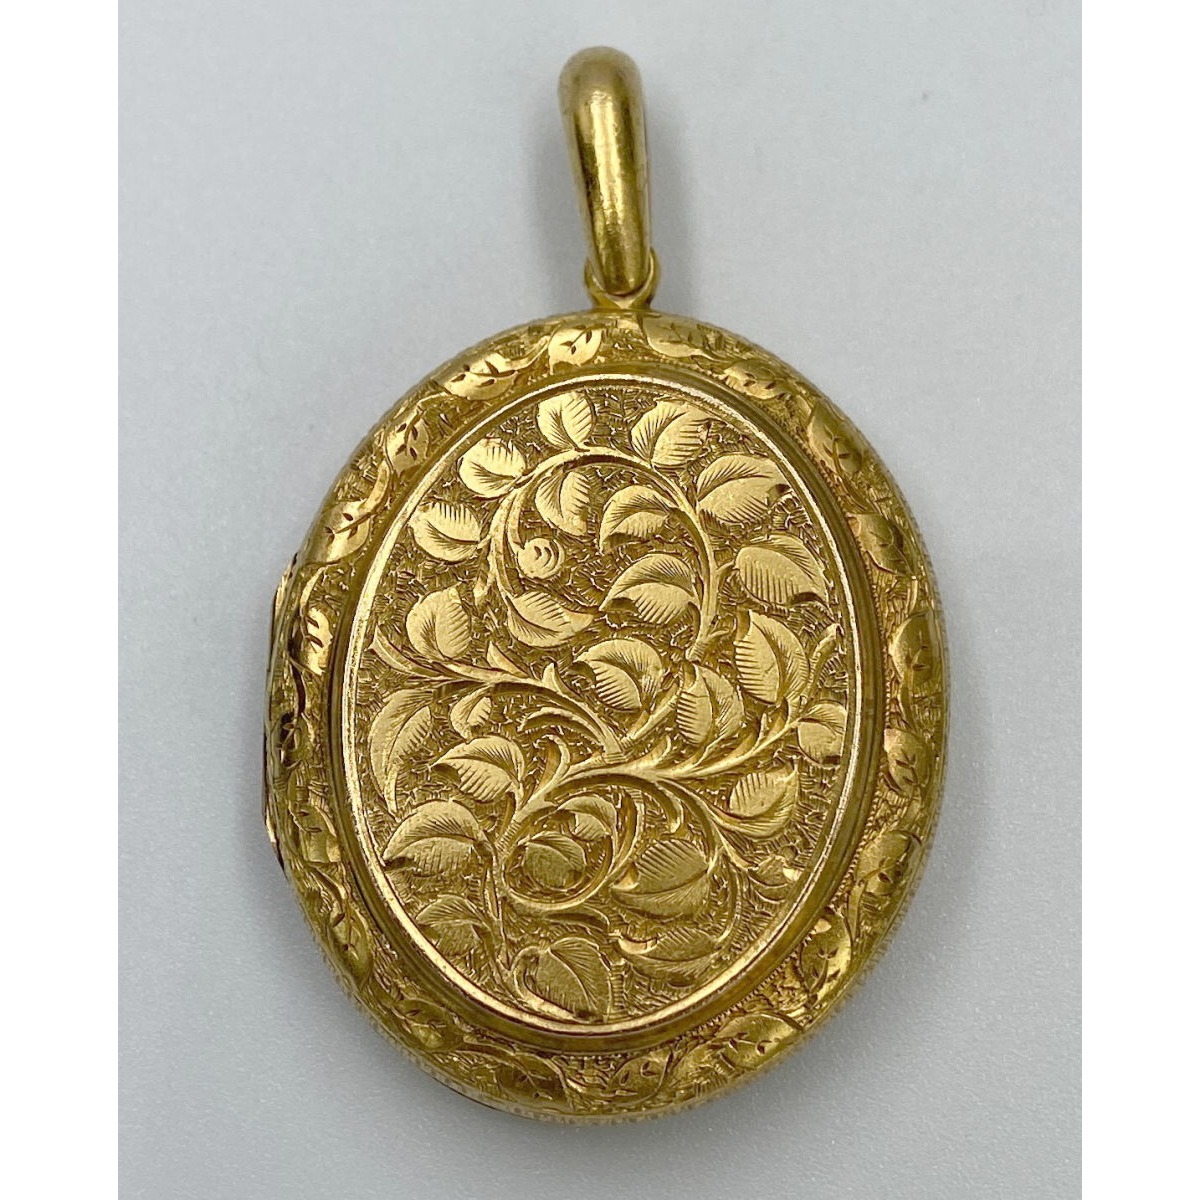 Stunning Large 15 karat Brilliant Yellow Gold Antique Locket with Double-Sided Engraving